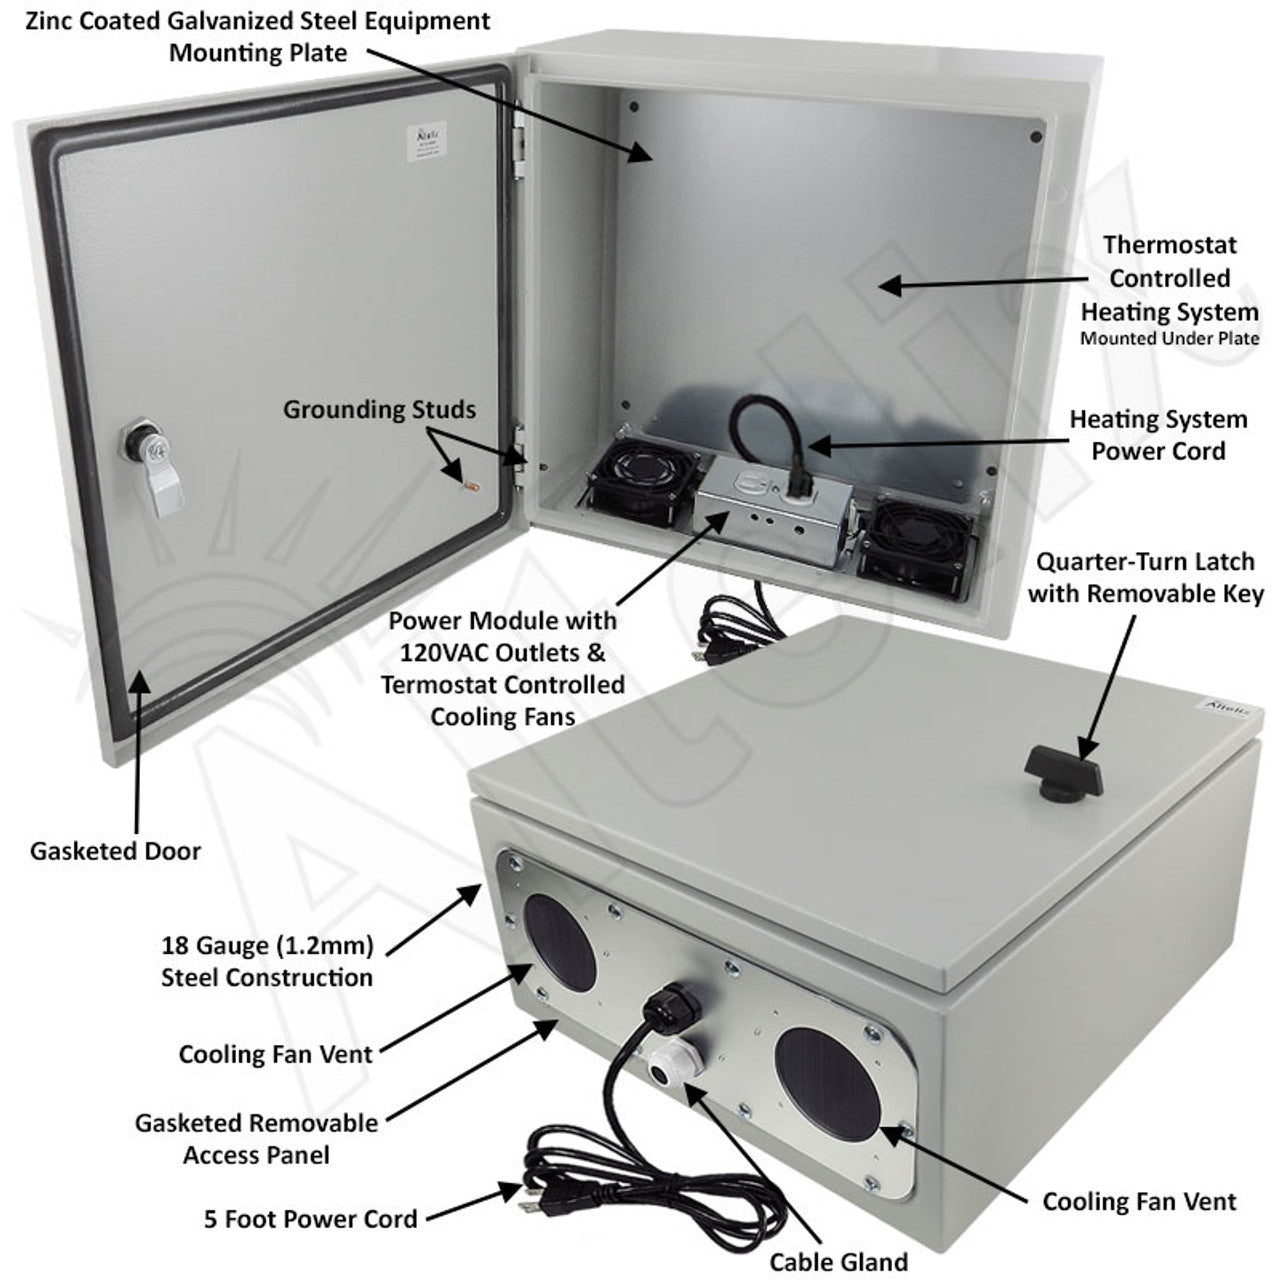 Altelix Steel Heated Weatherproof NEMA Enclosure with Dual Cooling Fans, 200W Heater, 120 VAC Outlets and Power Cord - 0